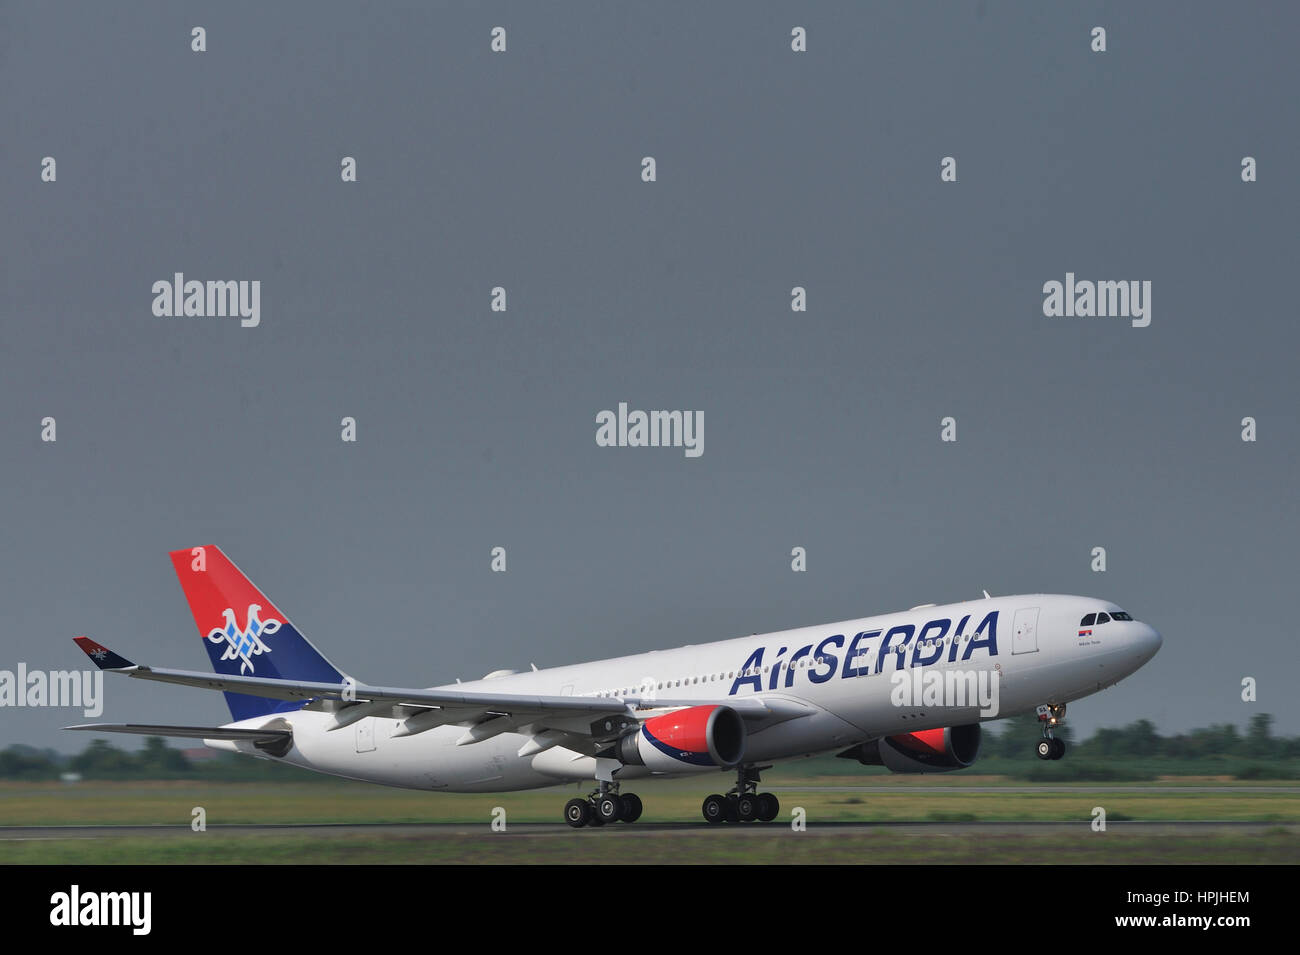 Air Serbia, national airline of Serbia Airbus A330 two-engine widebody passenger used for Belgrade to New York flights jet aircraft during take-off Stock Photo